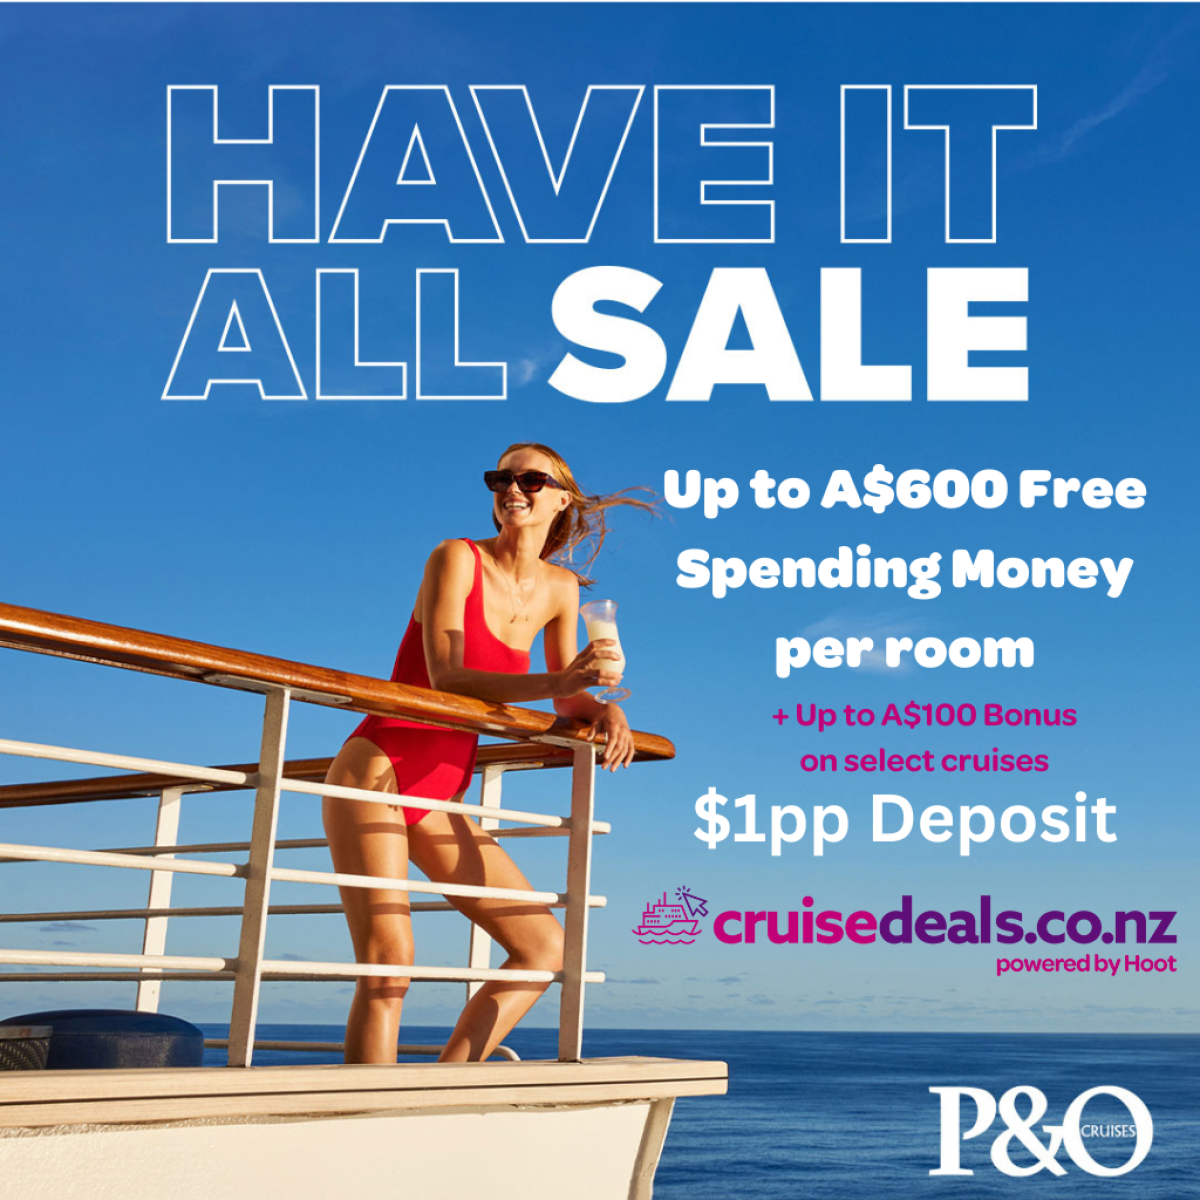 South Pacific holidays in 2024 with up to A$600 Free Spending Money for $1pp deposit